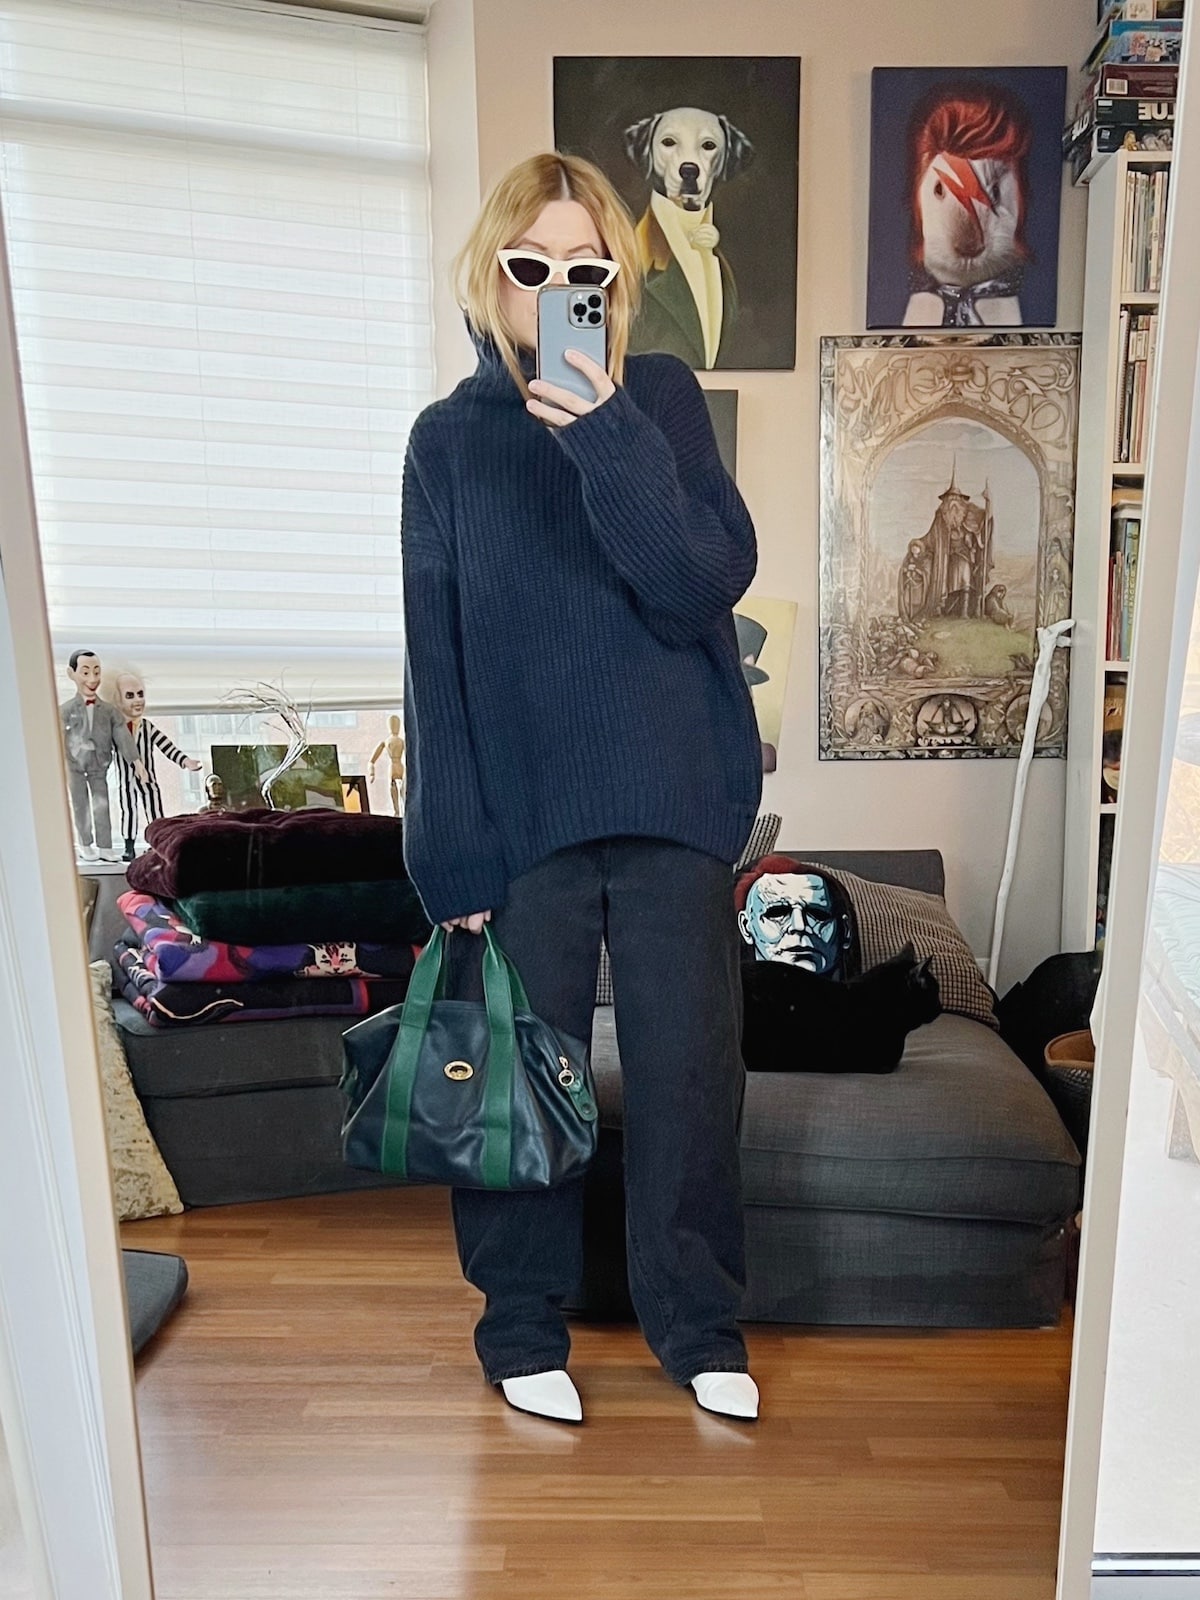 A blonde woman is wearing a navy blue sweater, black jeans, white boots, white sunglasses, and a vintage bag.